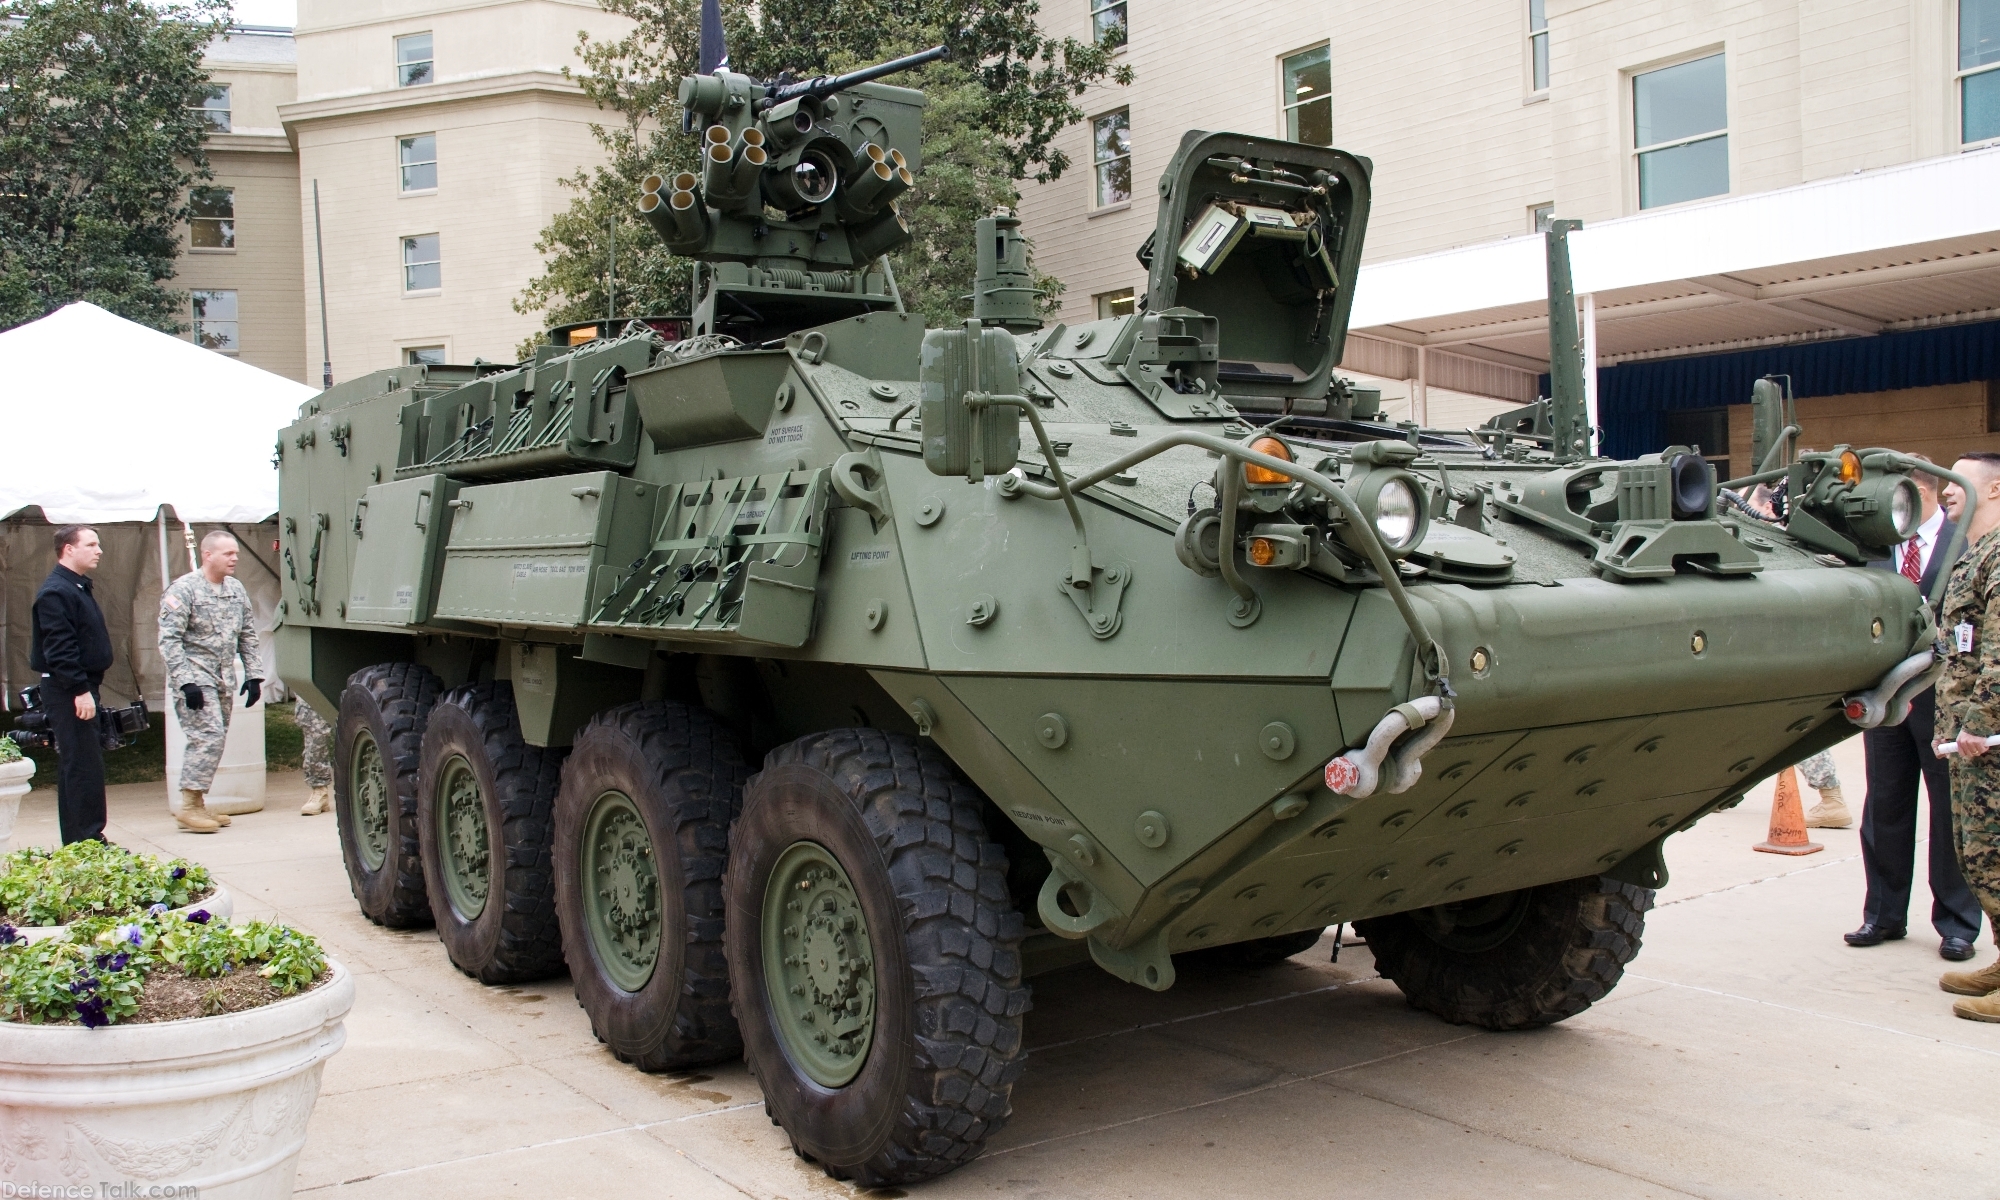 US Army Stryker nuclear, biological and chemical reconnaissance vehicle